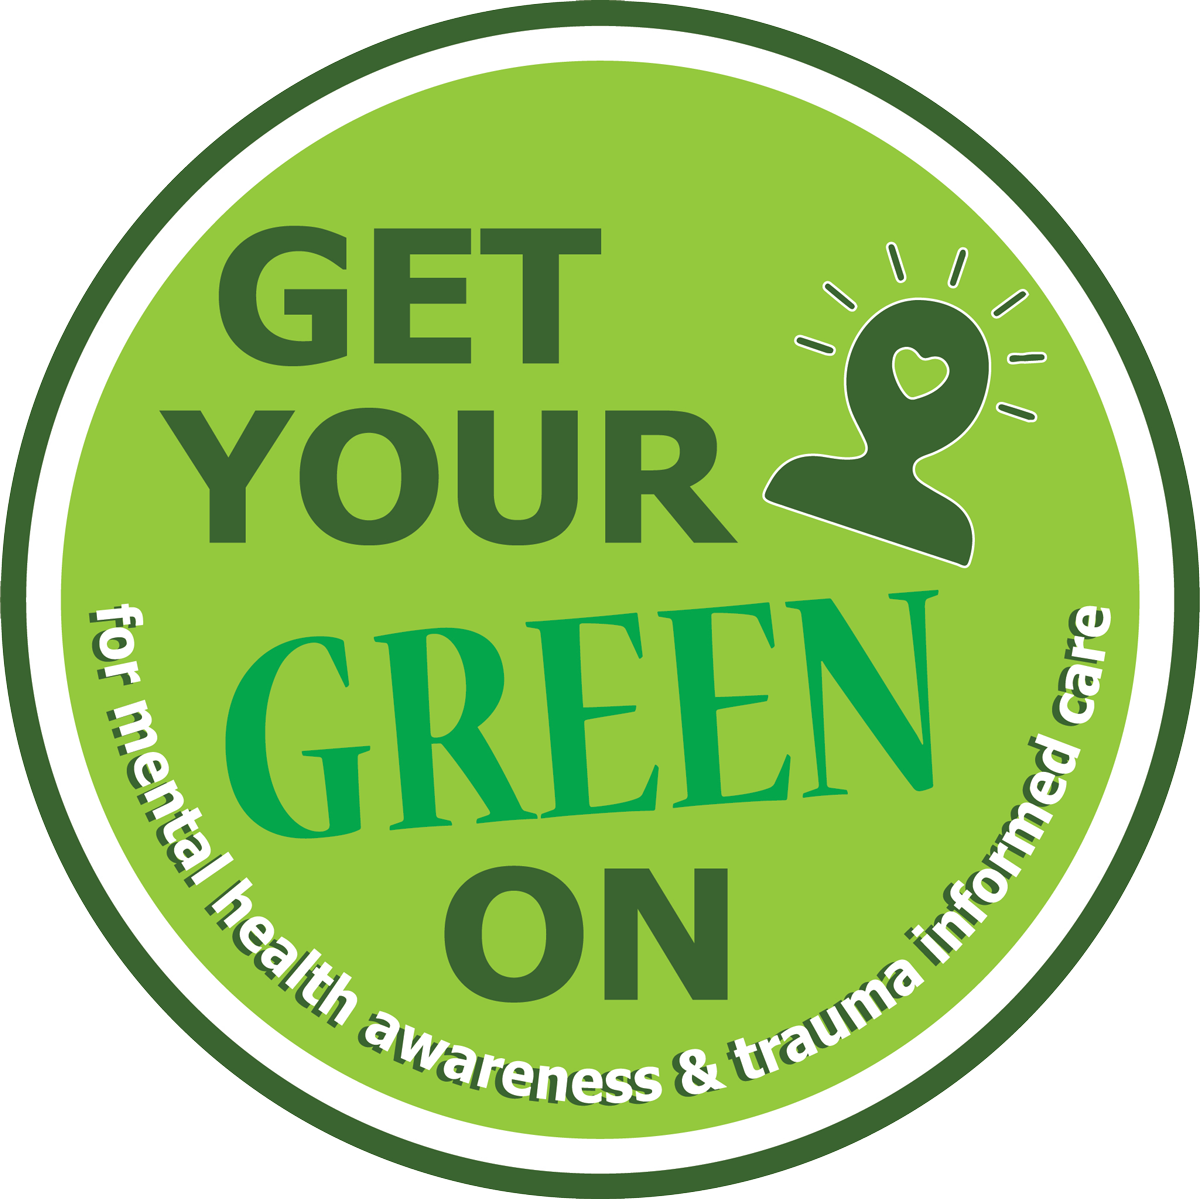 Get Your Green On logo image